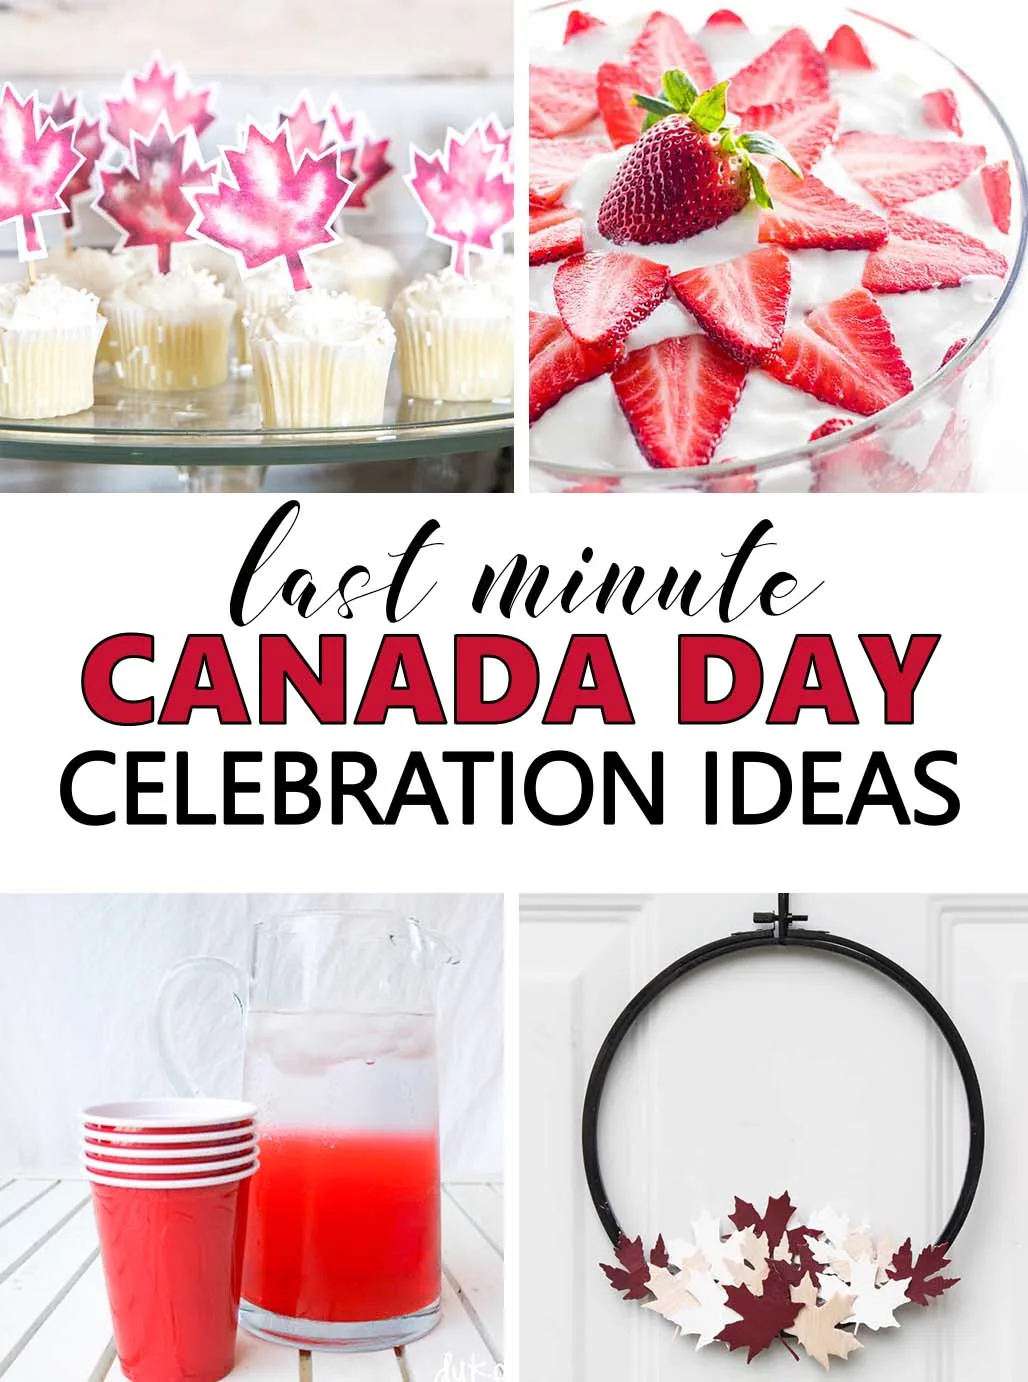 Canada Day is just around the corner. Whether you're planning ahead or looking for last minute party ideas, choose from these red and white themed Canada Day celebration ideas to get into the spirit!